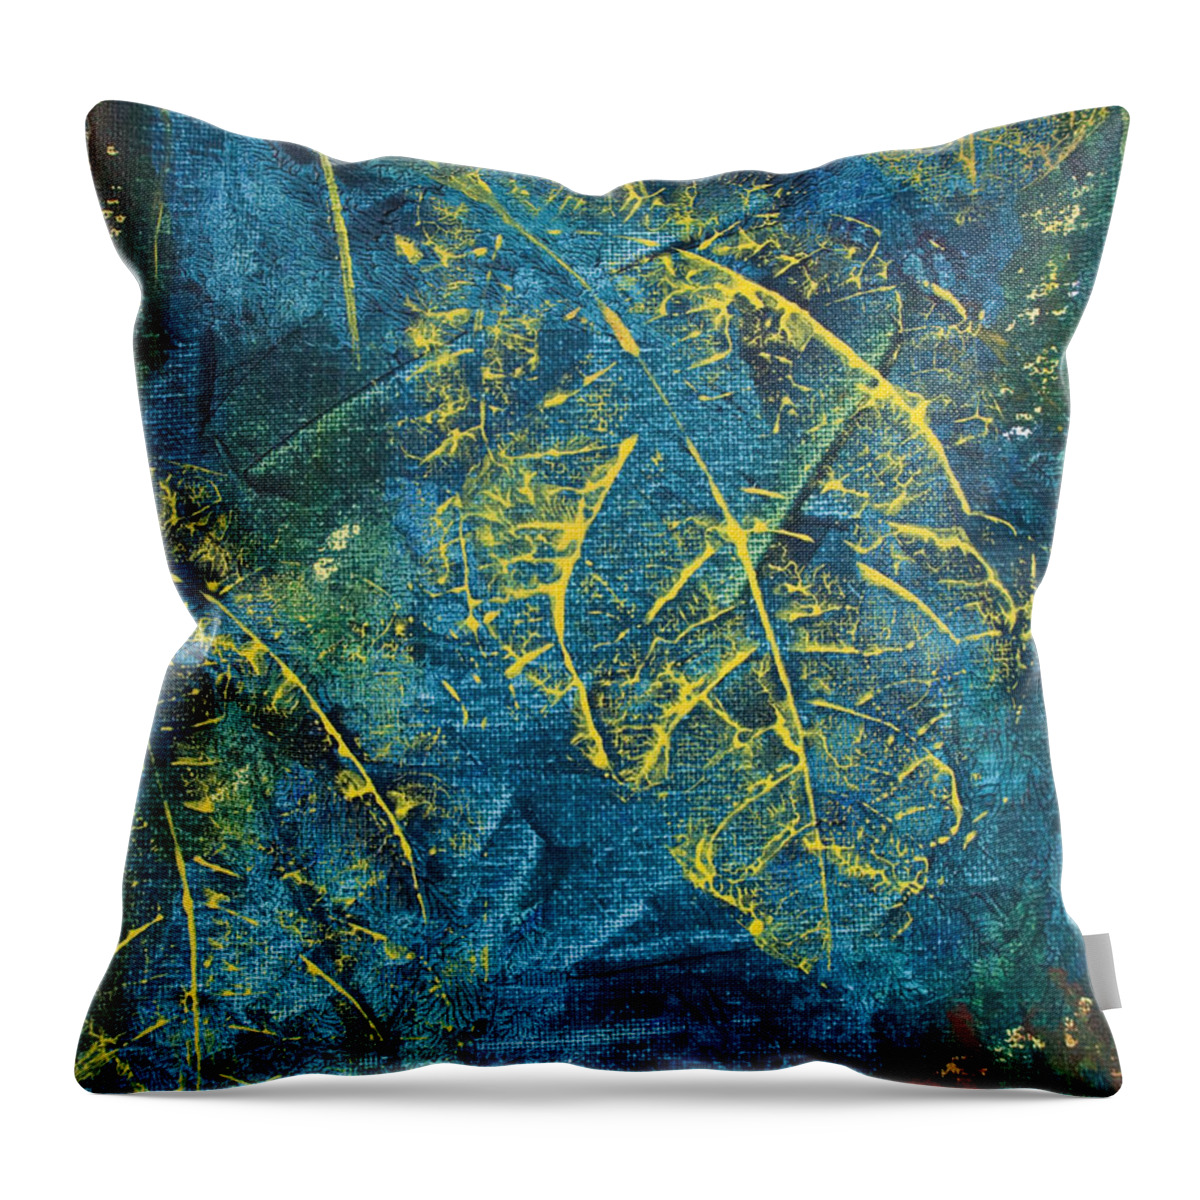 Midnight Throw Pillow featuring the painting Night Moves by Jaime Haney